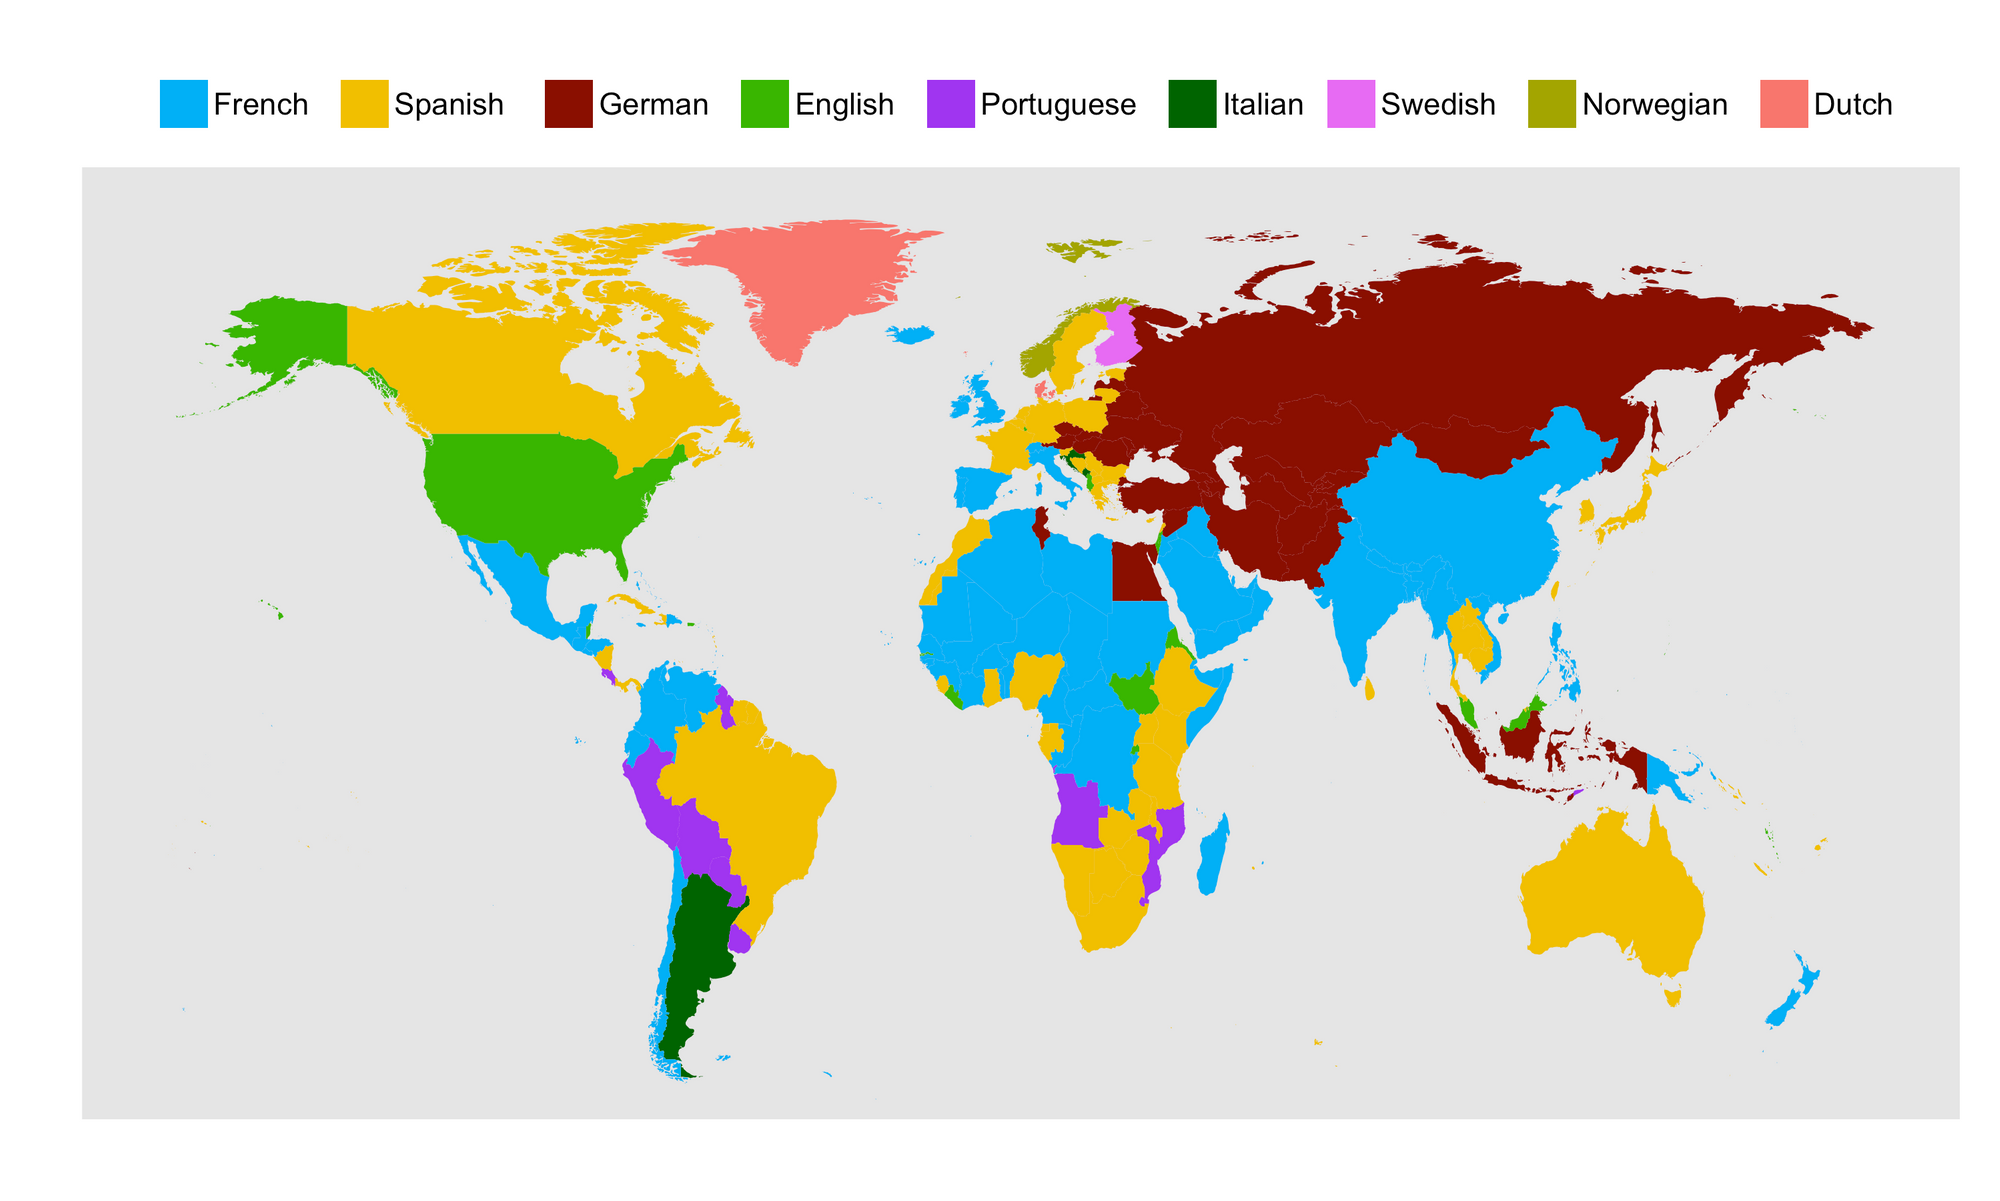 The second most popular language studied on Duolingo in each country